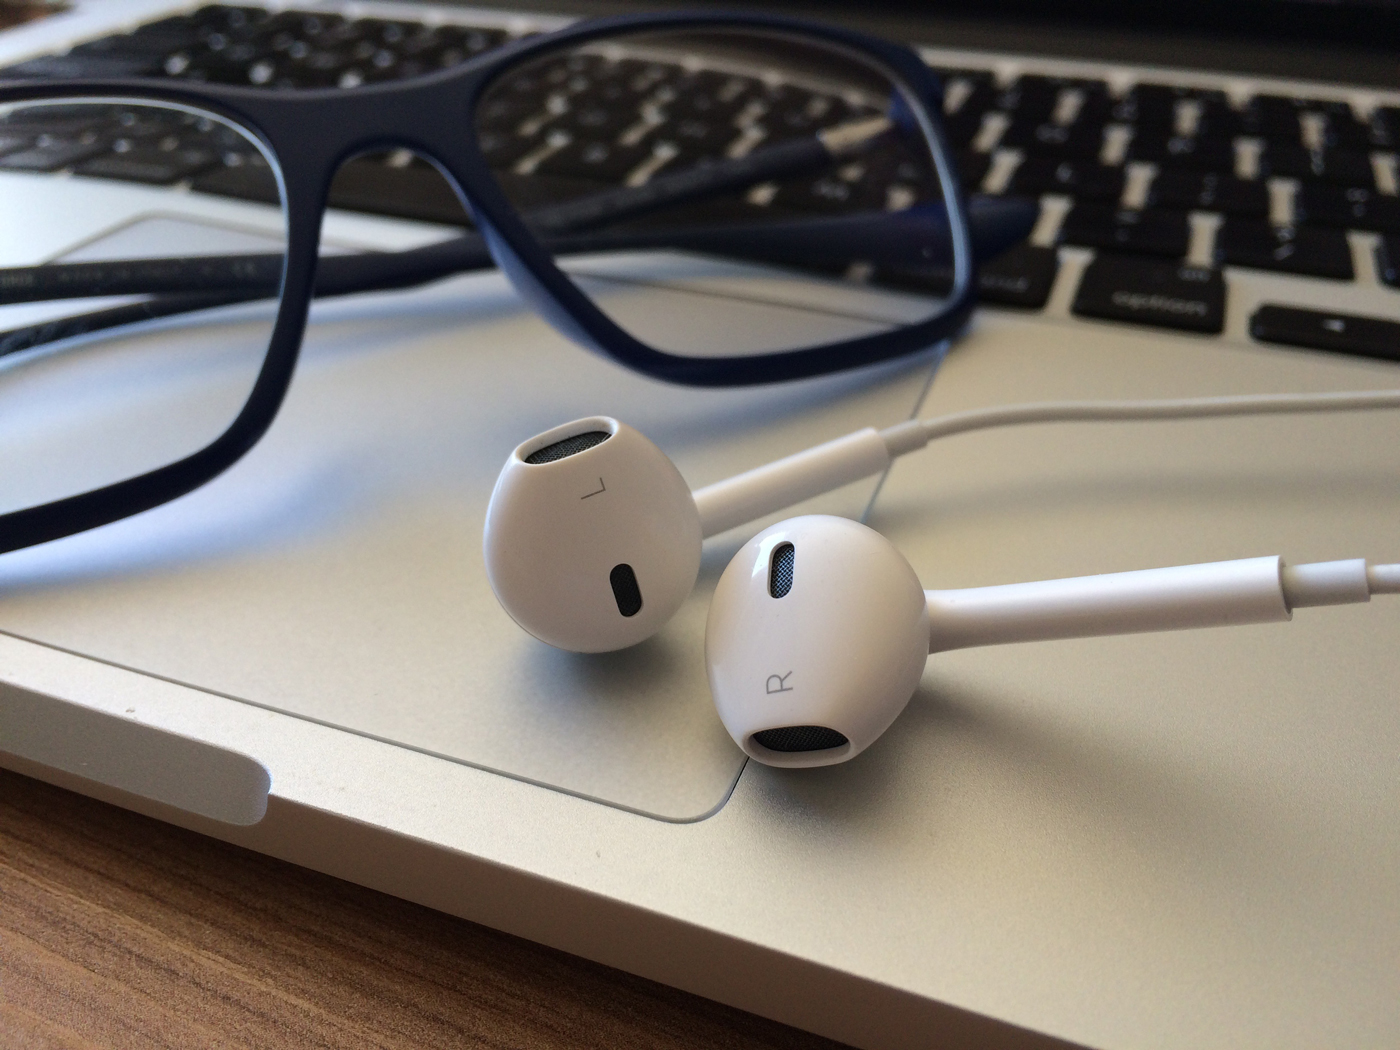 A pair of headphones resting on a laptop next to a pair of reading glasses